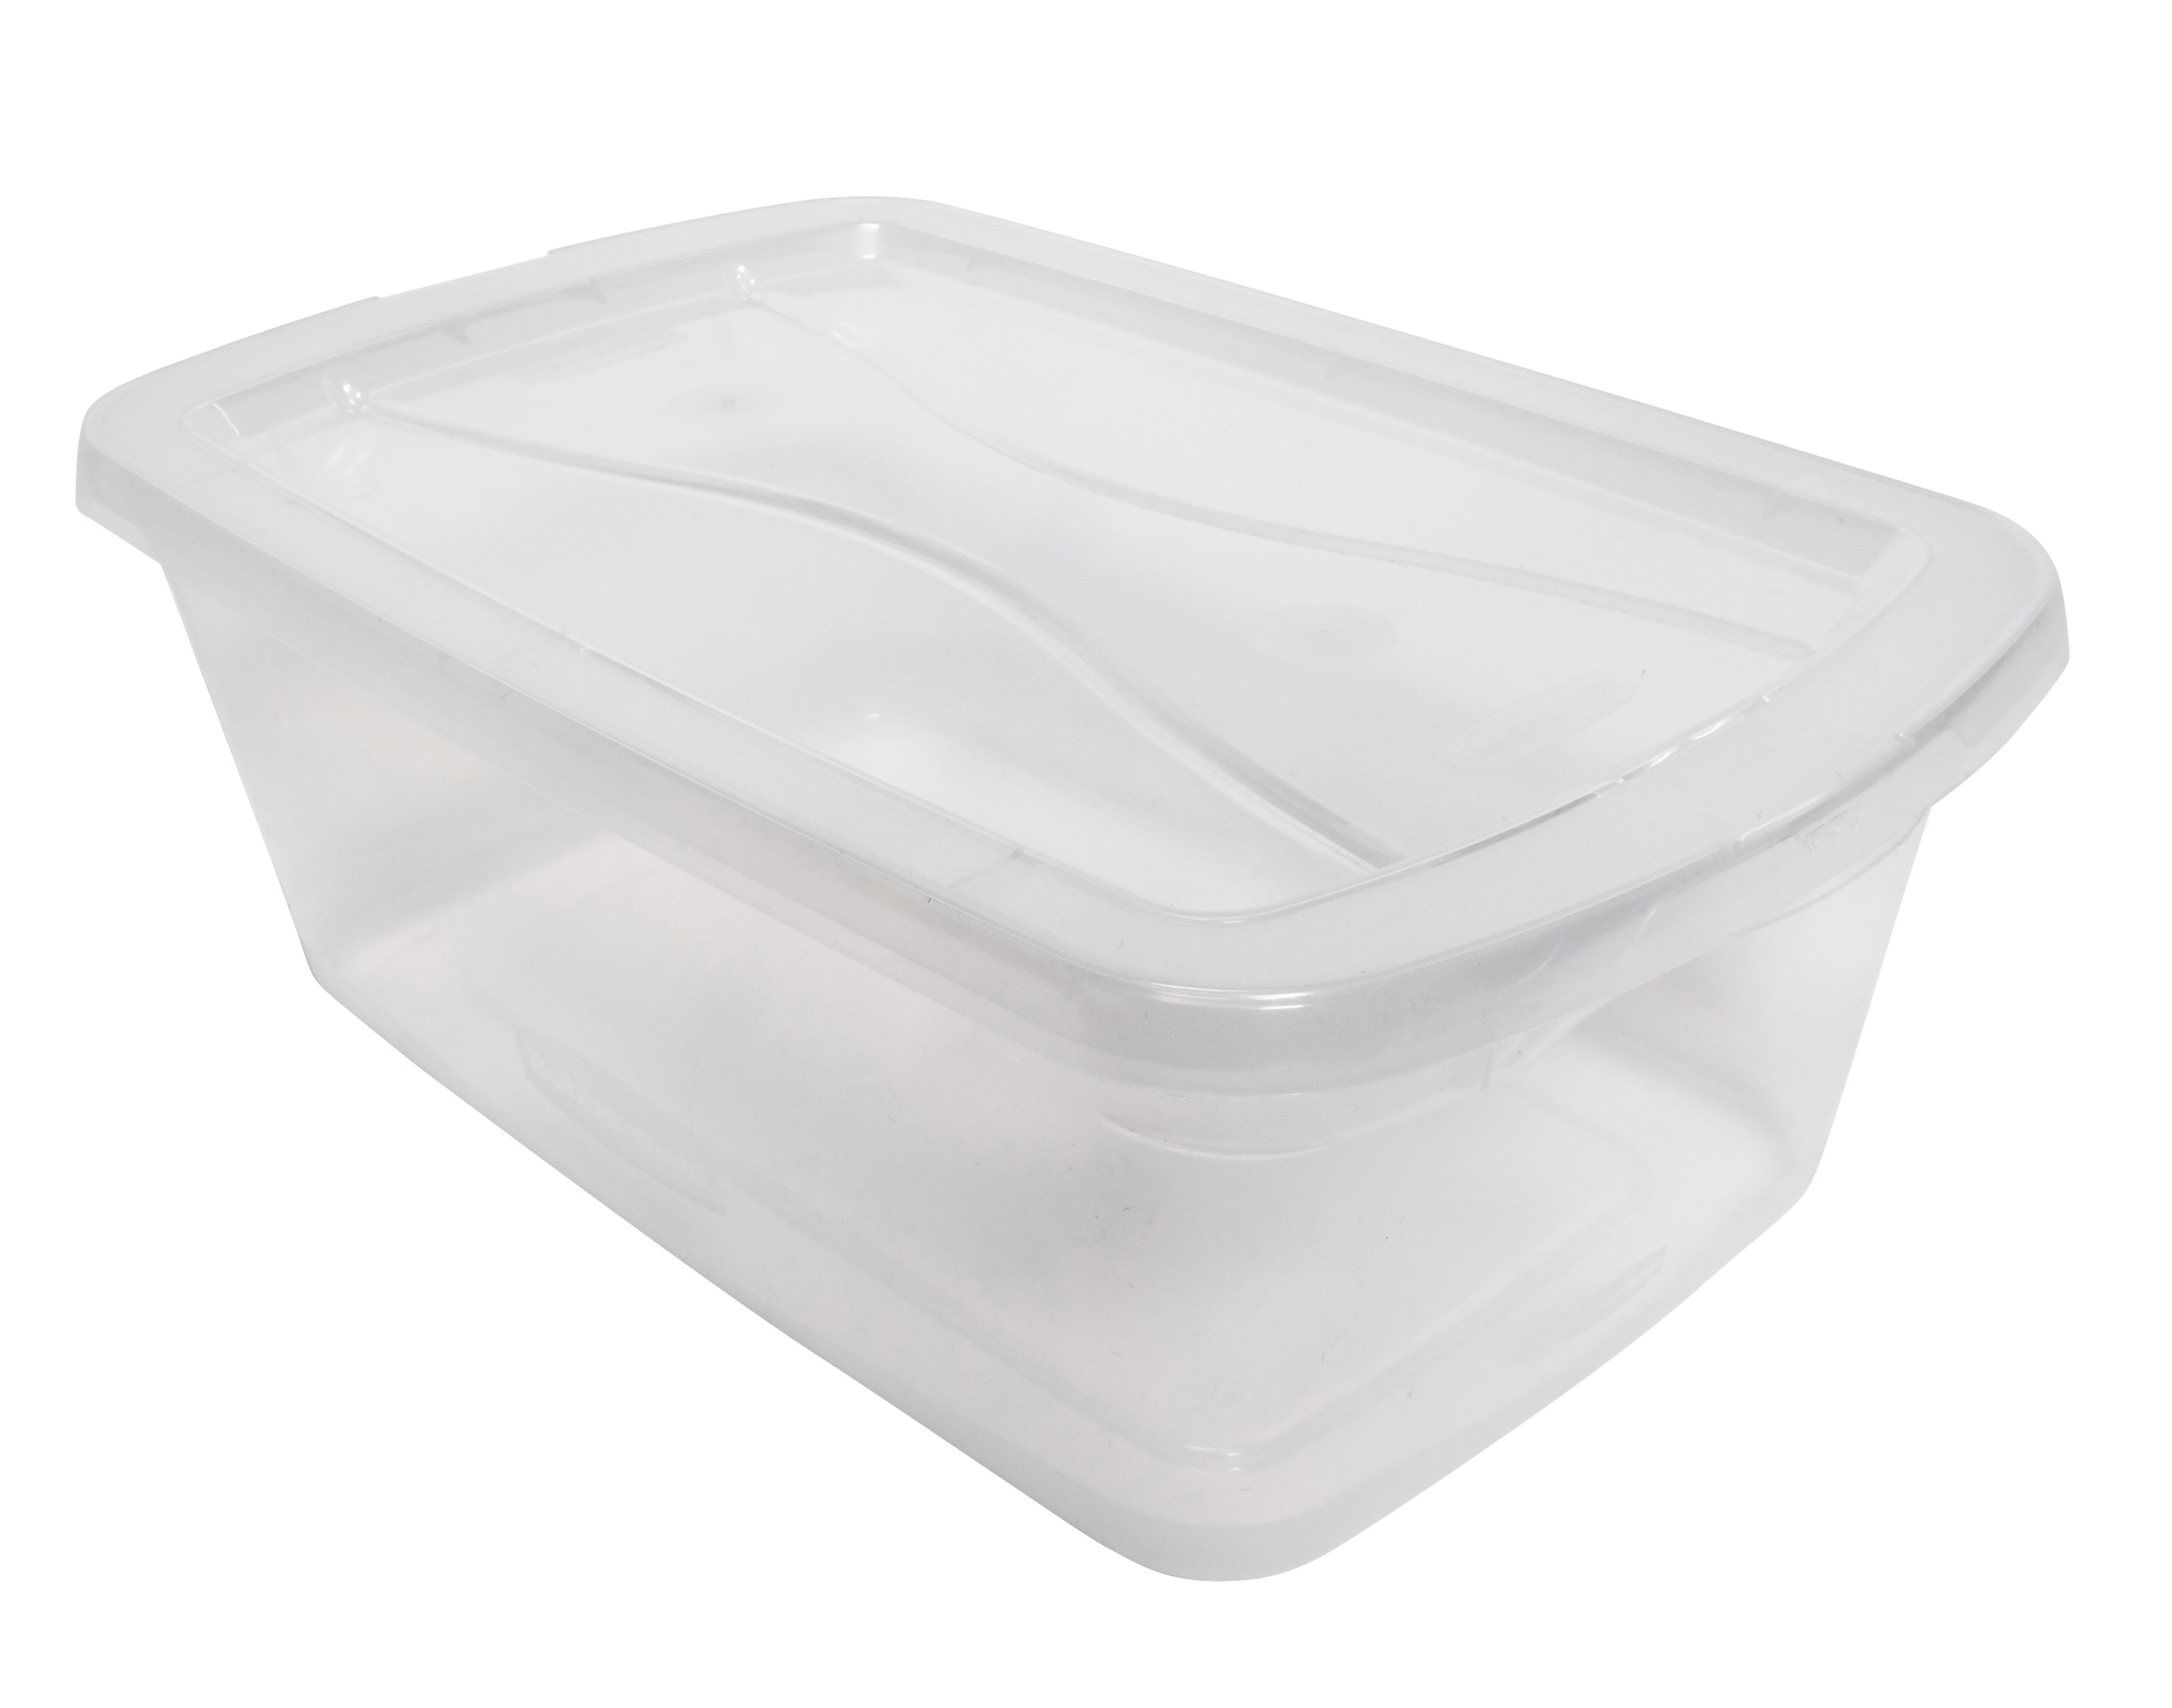 Rubbermaid Roughneck Clear 50 Qt. Plastic Storage Tote w/ Gray Lid